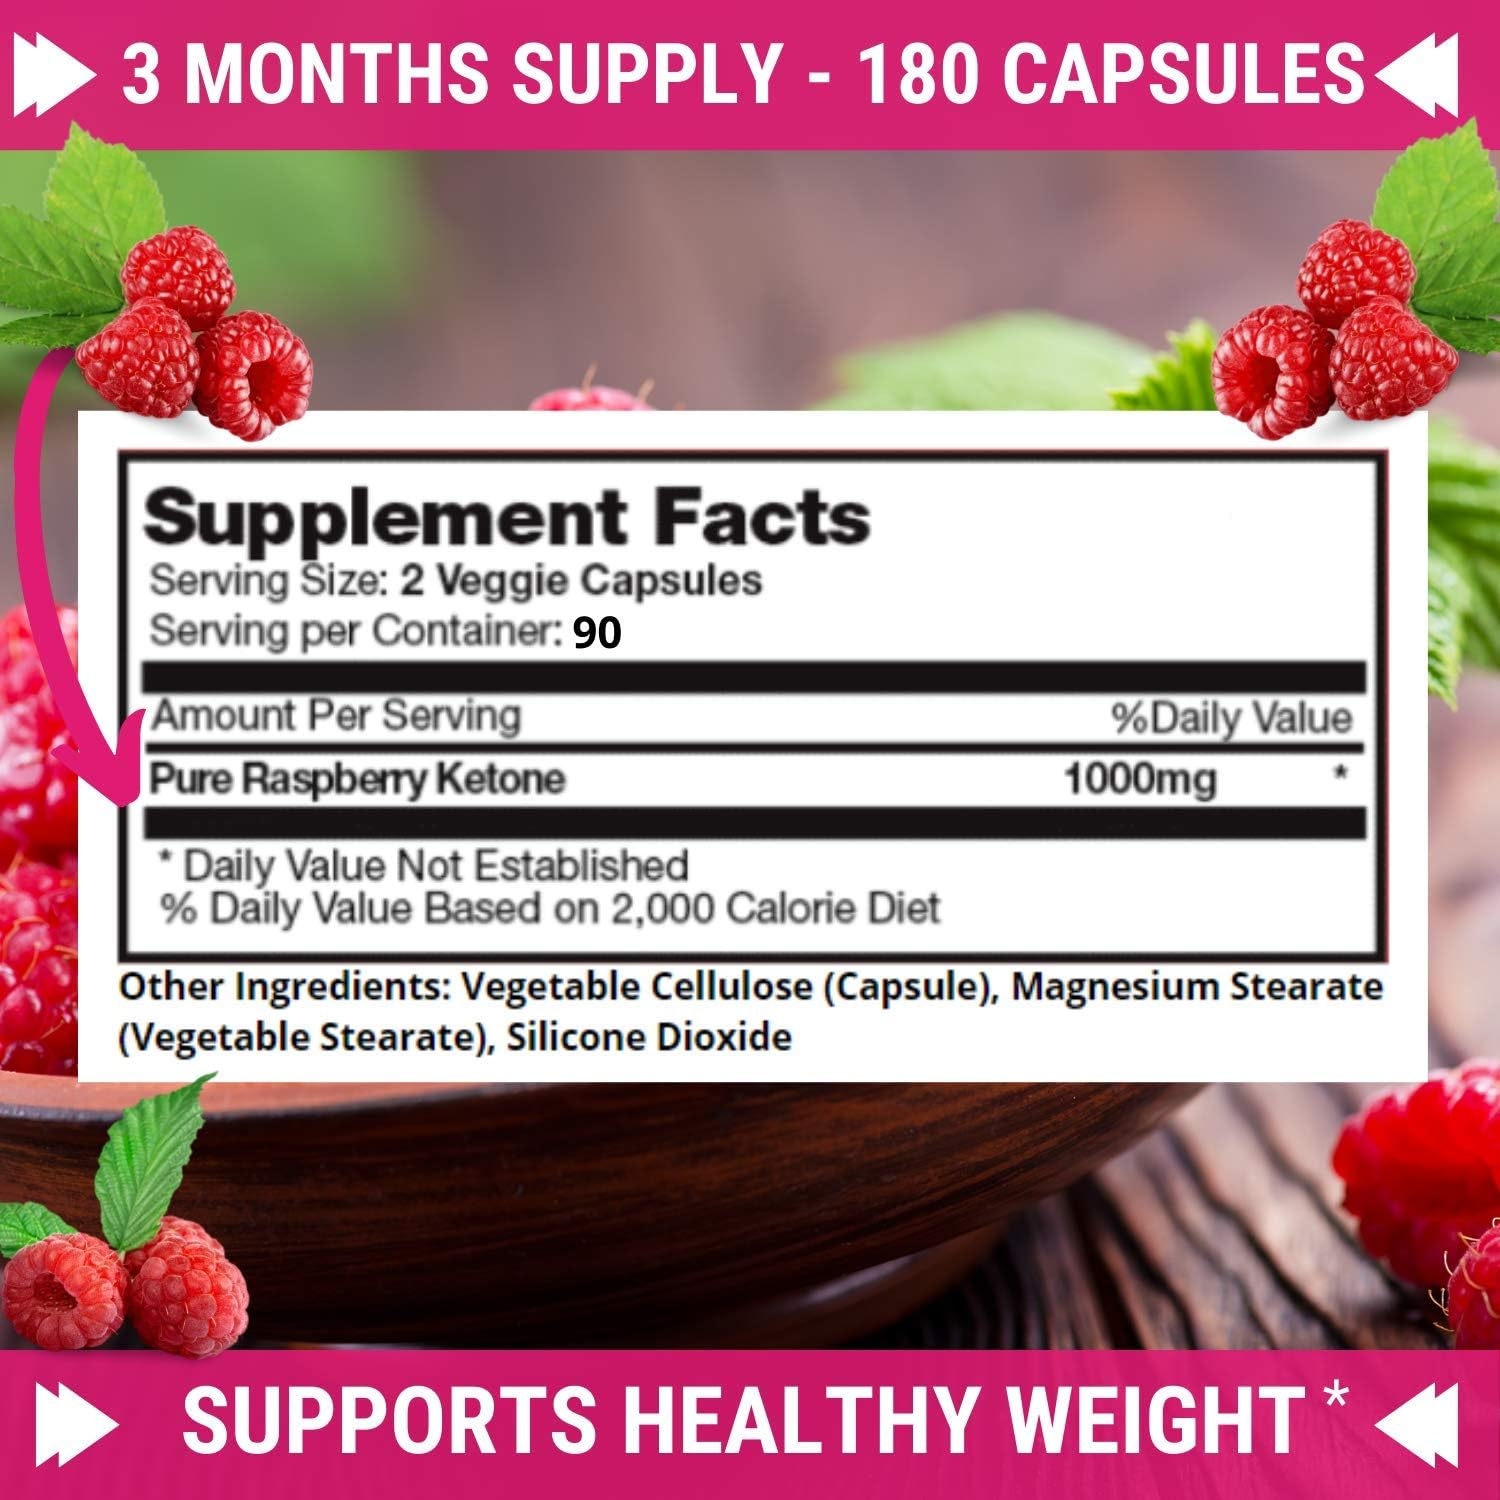 Pure 100% Raspberry Ketones Max 1000mg Per Serving - 3 Month Supply - Powerful Weight Loss Supplement - Provides Energy Boost for Weight Loss - 180 Capsules by Fresh Healthcare